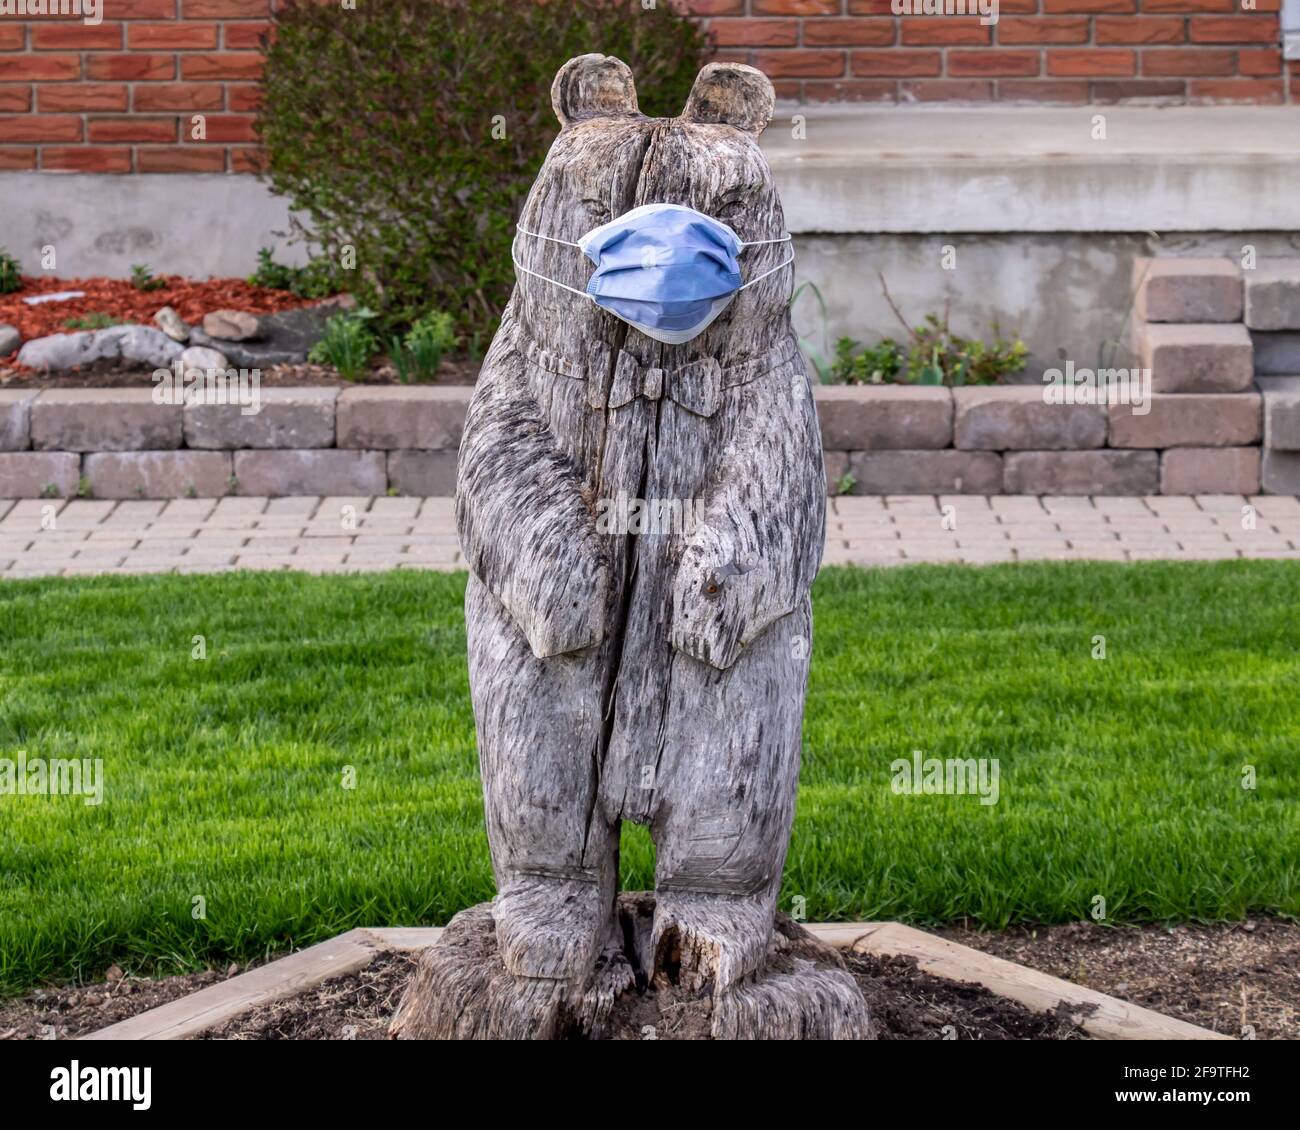 Statue of a bear with a surgical mask on during third wave COVID-19 lockdowns and pandemic in Ontario, Canada Stock Photo